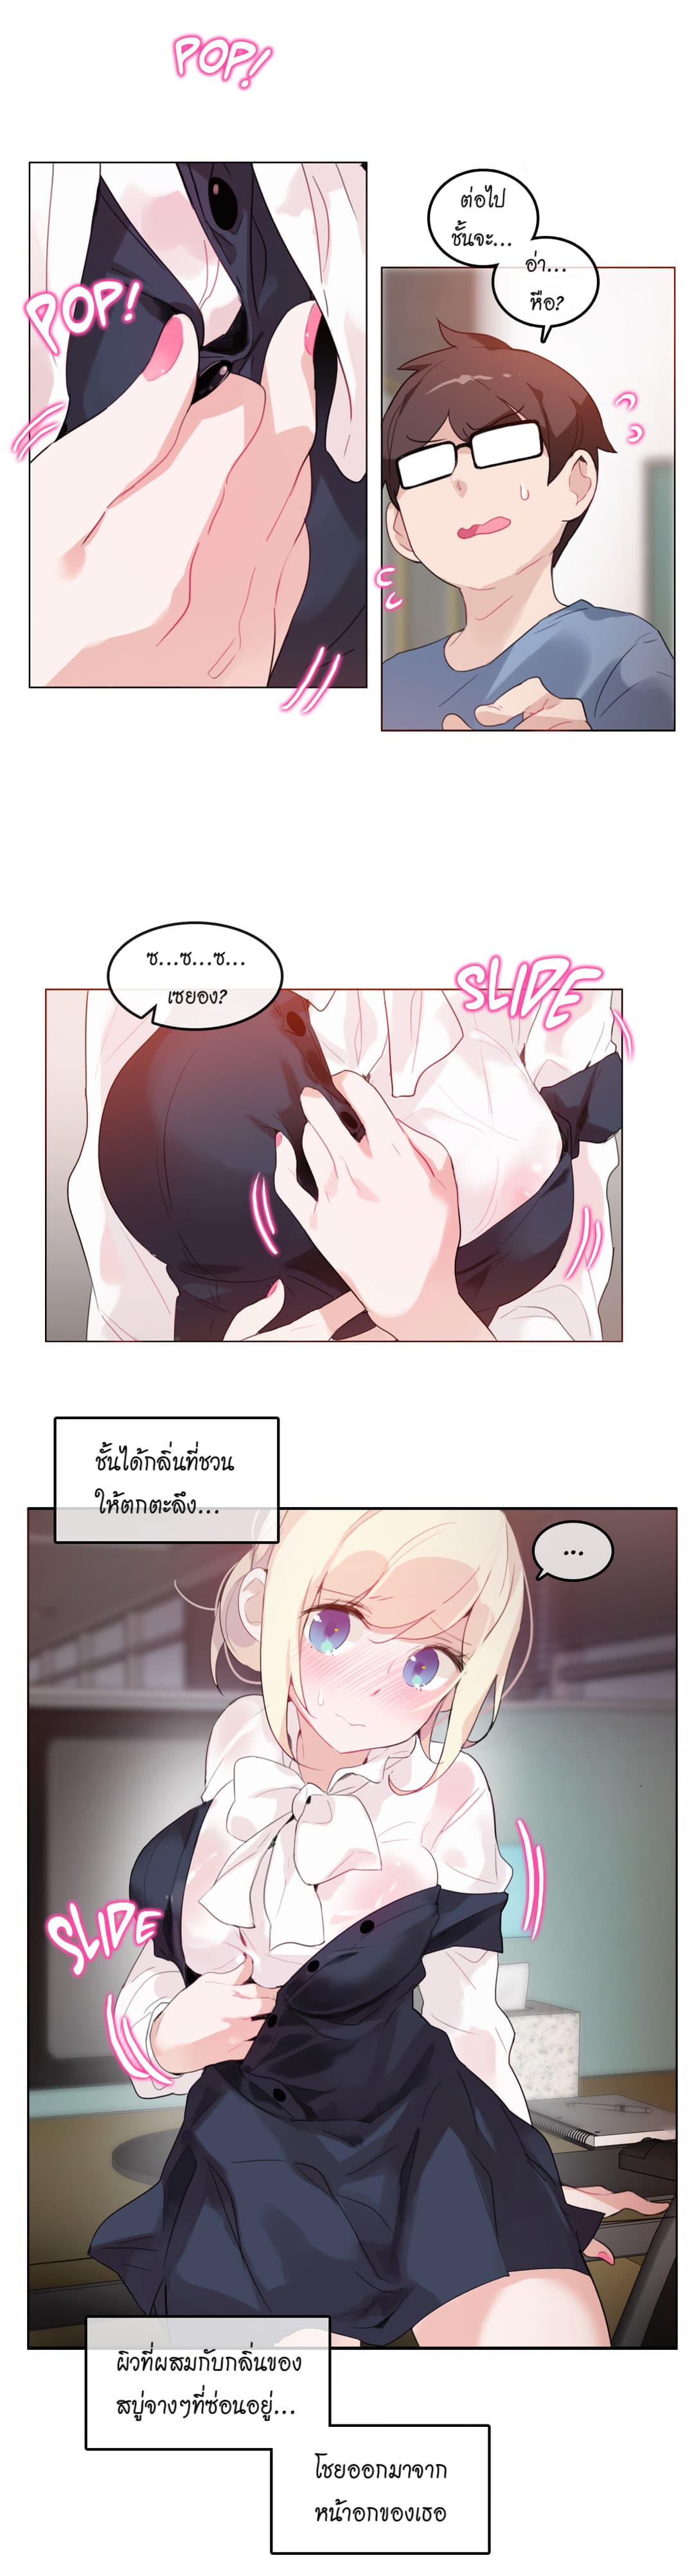 A Pervert’s Daily Life 24 (5)